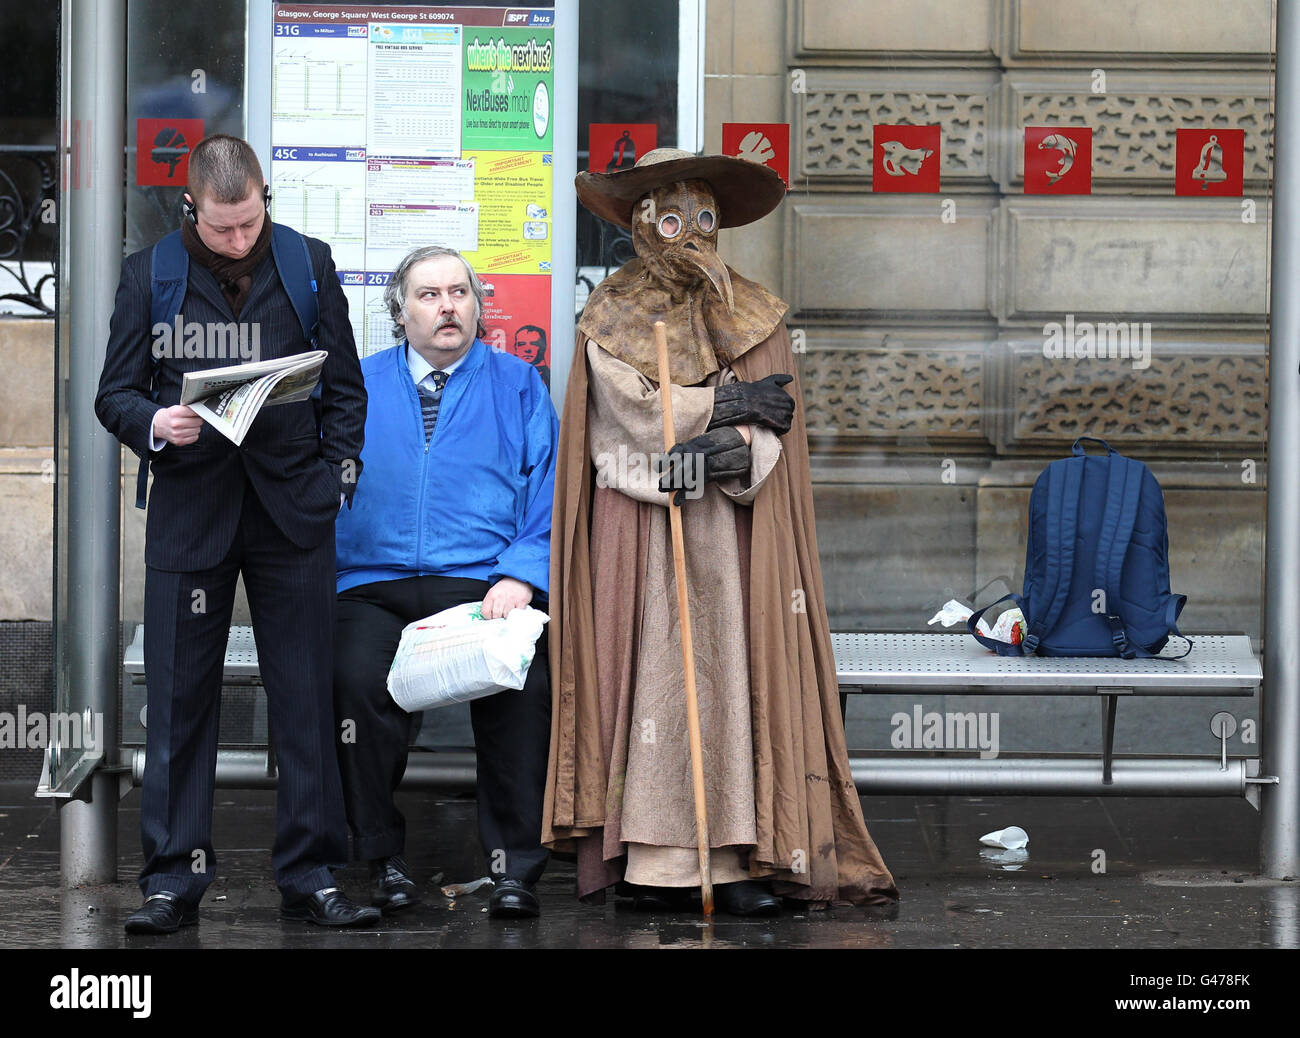 Artist Frank To who is dressed as a medieval plague doctor, stands in a bus shelter during a performance in George Square, Glasgow, as he launches his first exhibition for two years, 'The Human Condition', which will open at Leith Gallery in Edinburgh tomorrow. Stock Photo